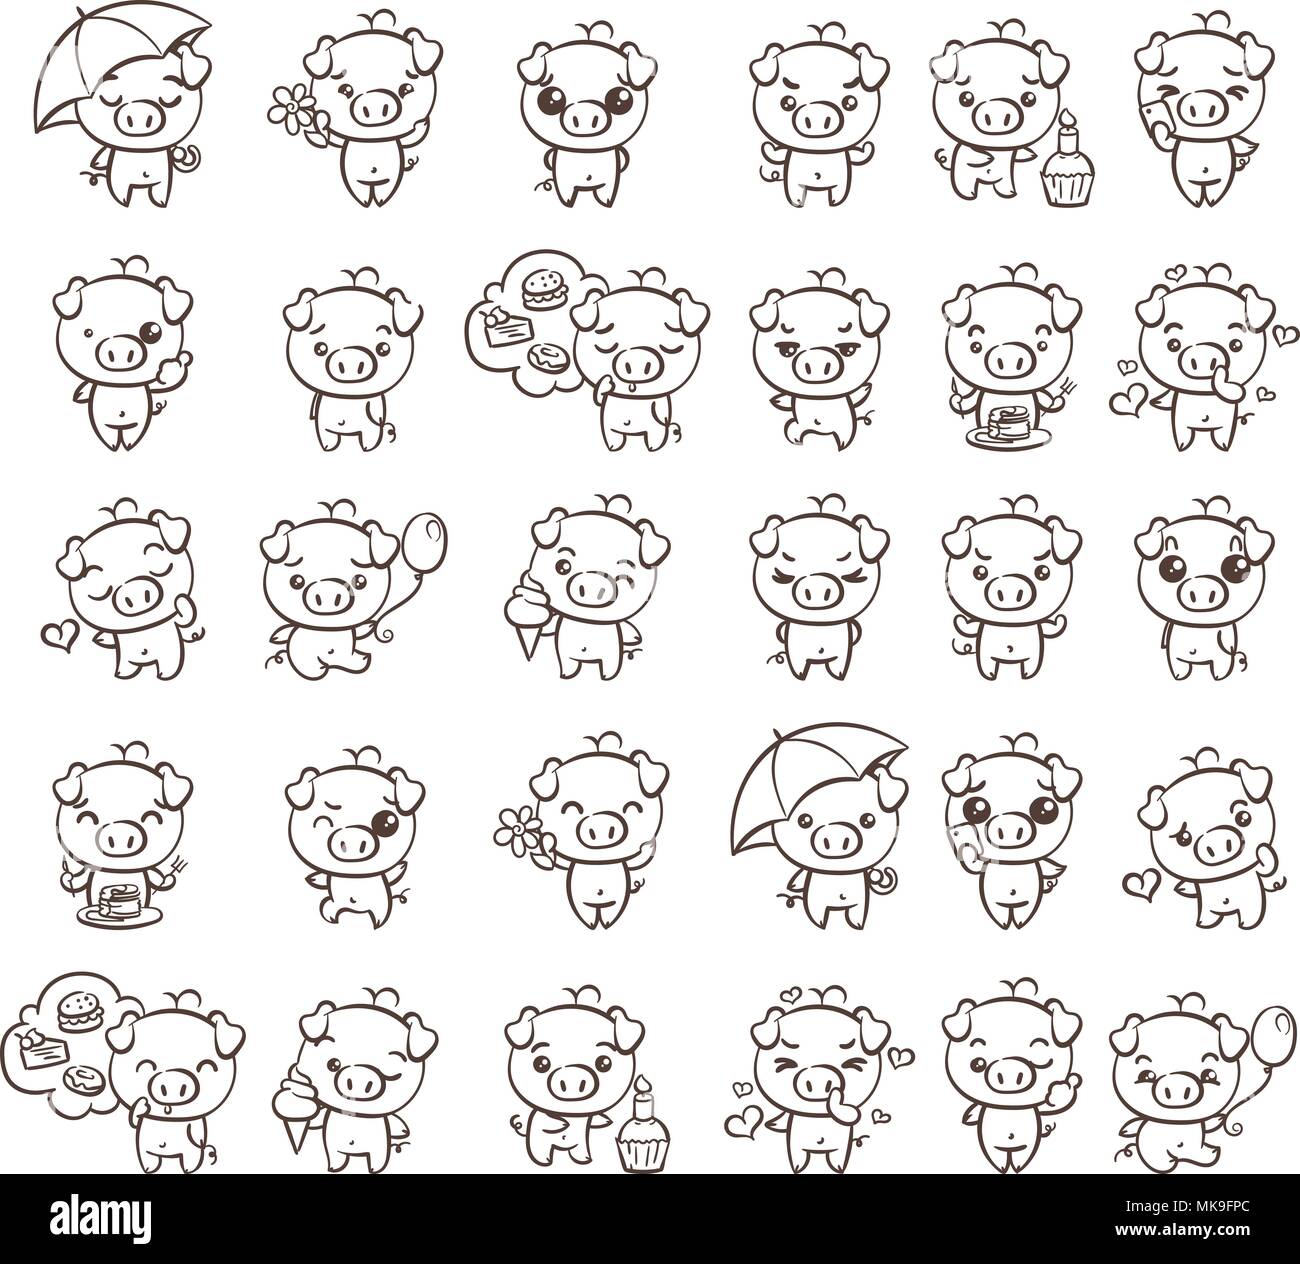 Coloring page with collection of cutest pig character icon set with different emotions vector illustration for new year set of small piggy stock vector image art